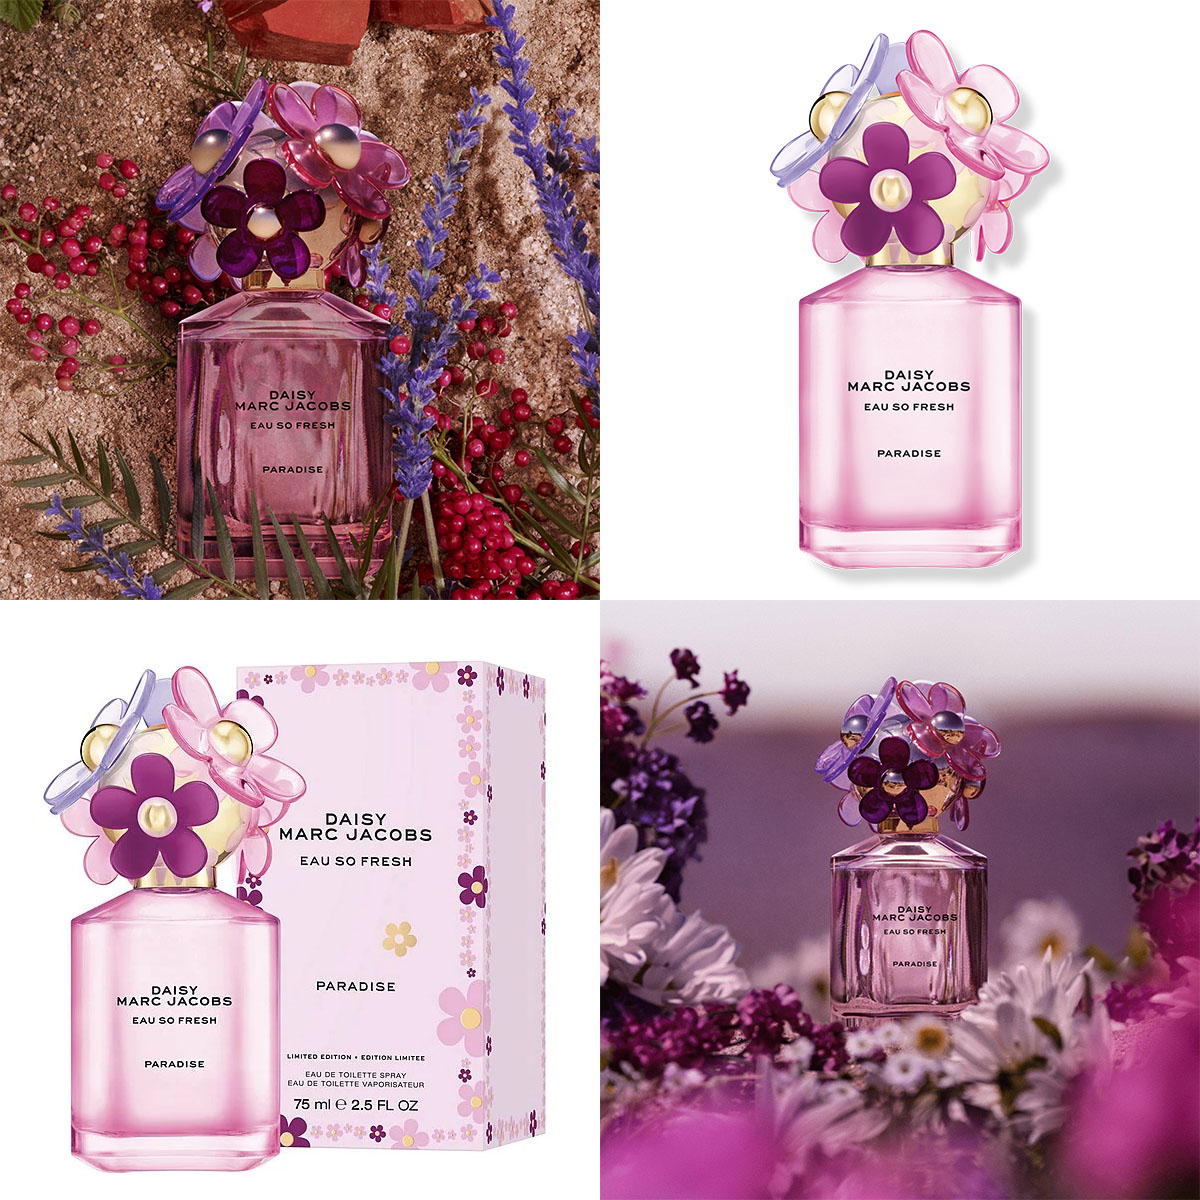 Marc Jacobs Daisy Eau So Fresh Paradise perfume bottle, packaging, and fragrance ads